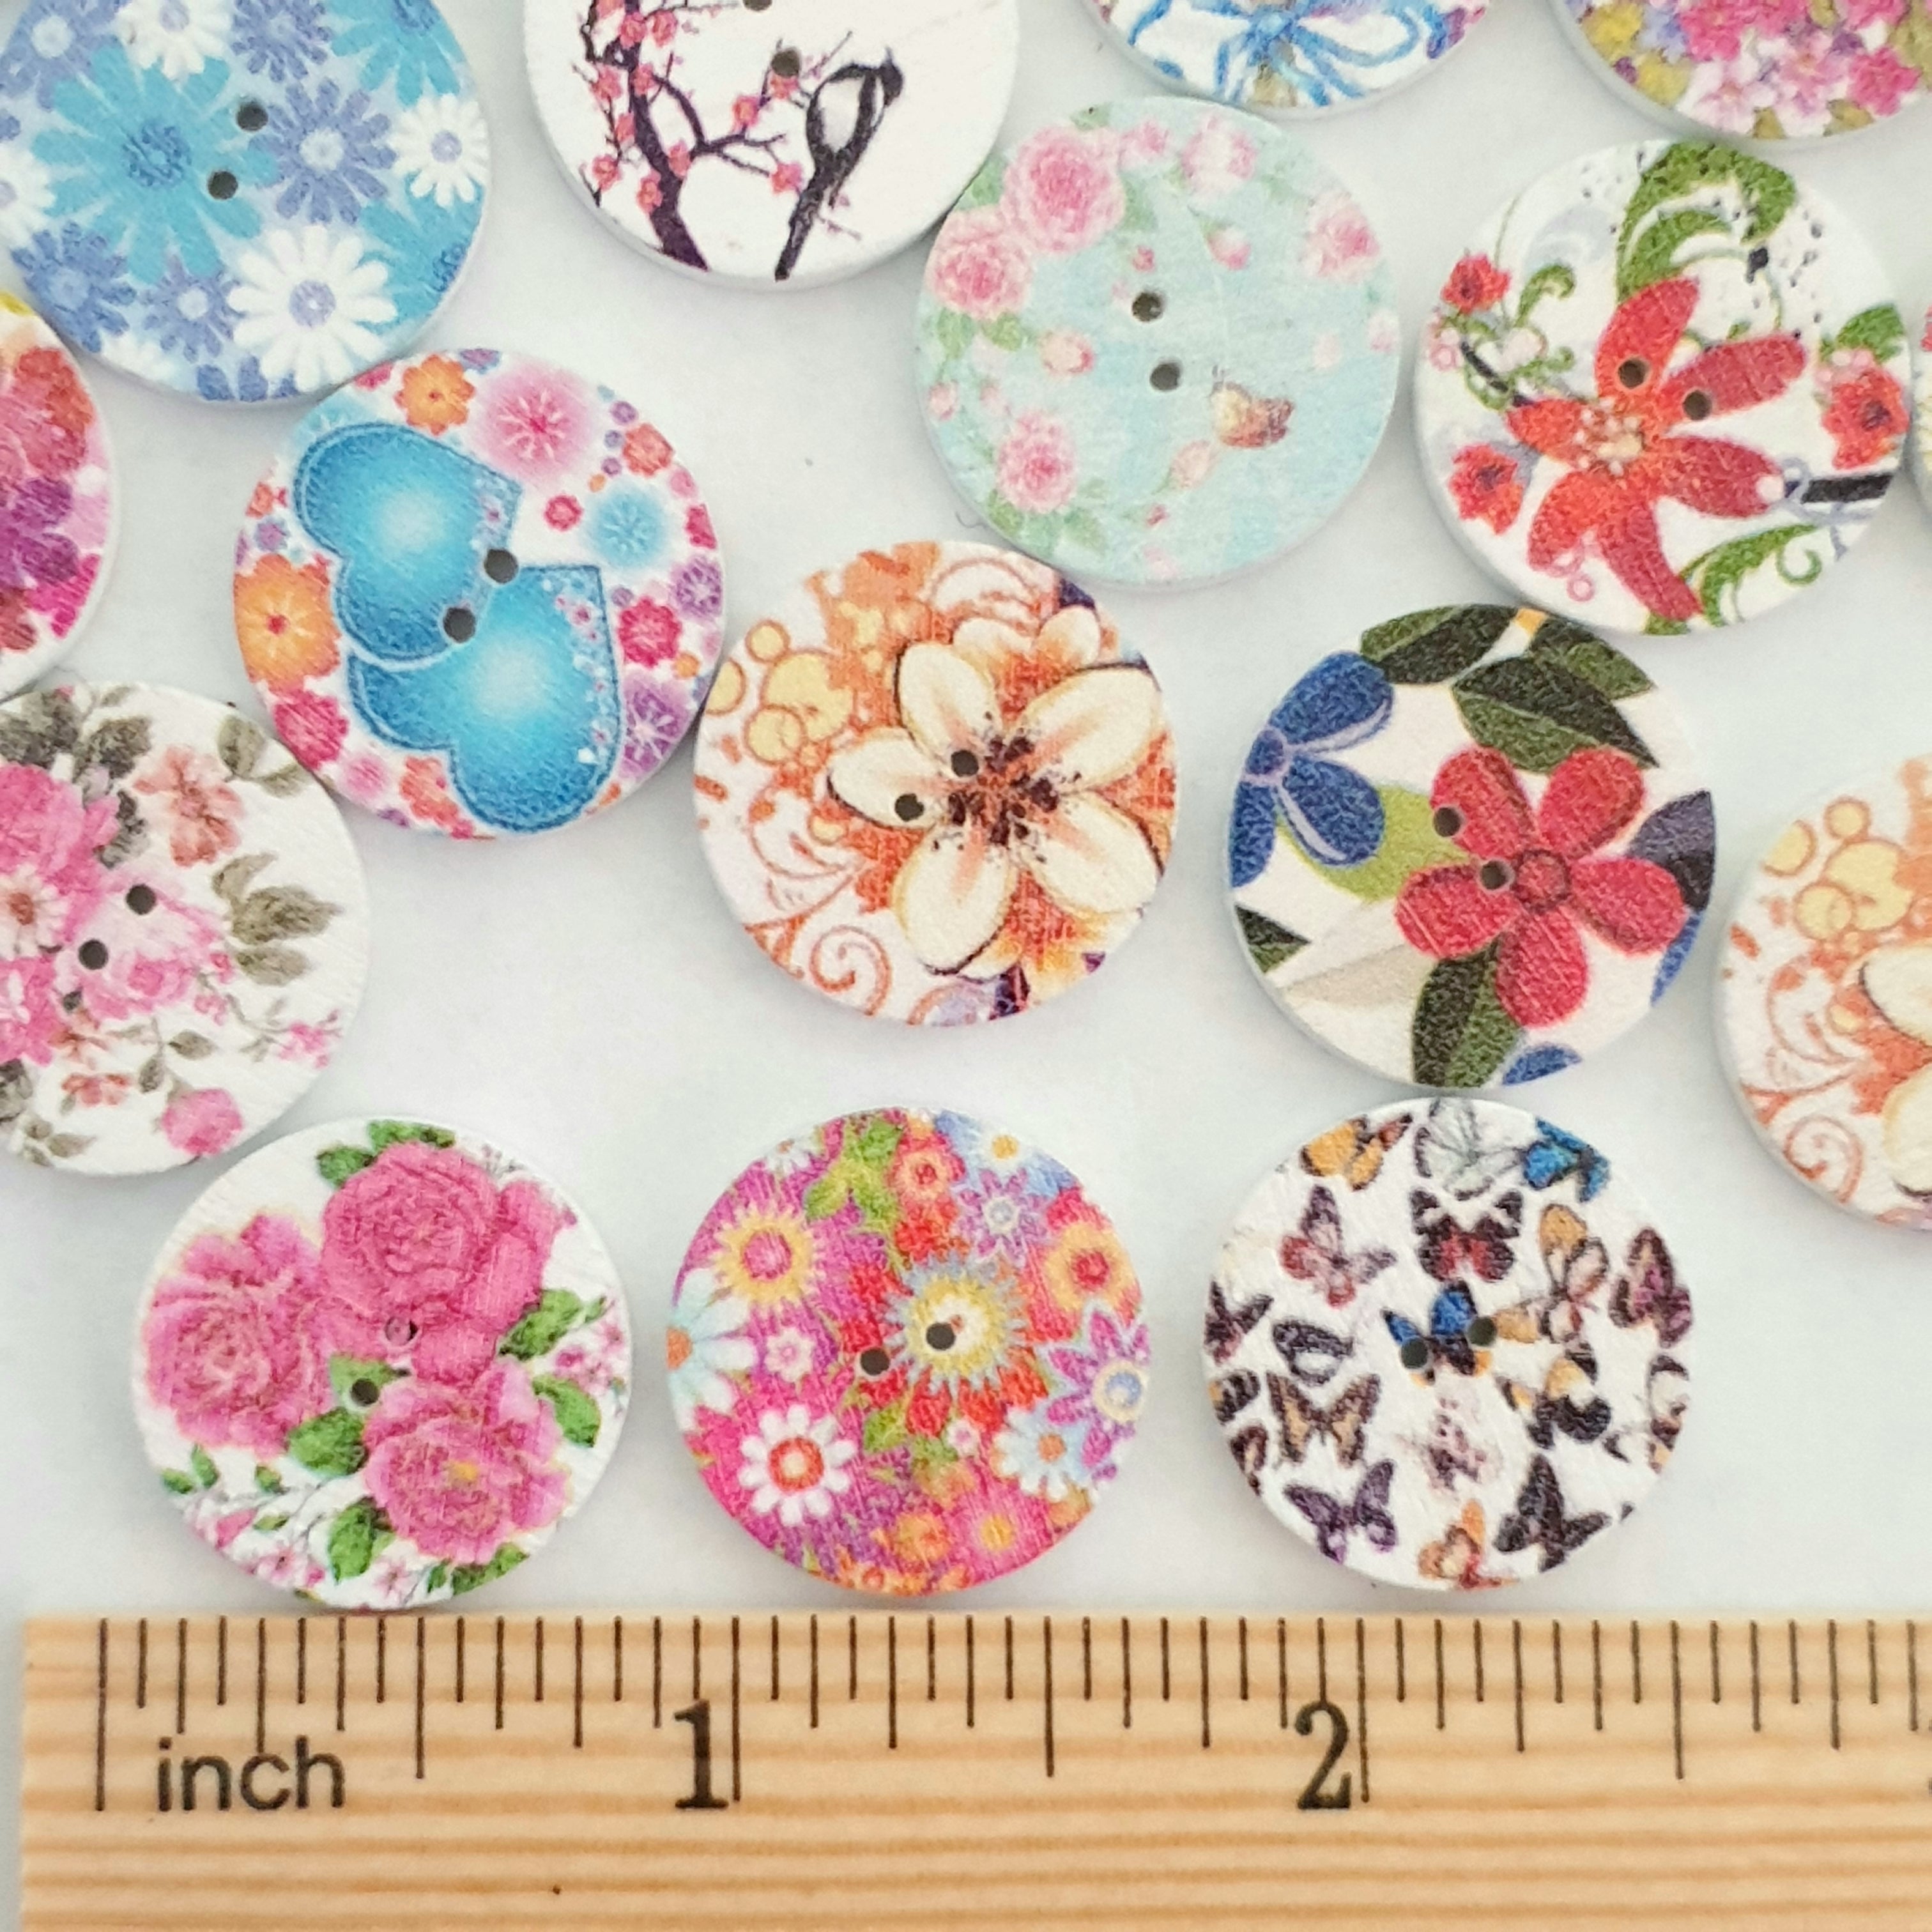 MajorCrafts 24pcs 20mm Random Mixed Flower Pattern 2 Holes Round Wooden Sewing Buttons